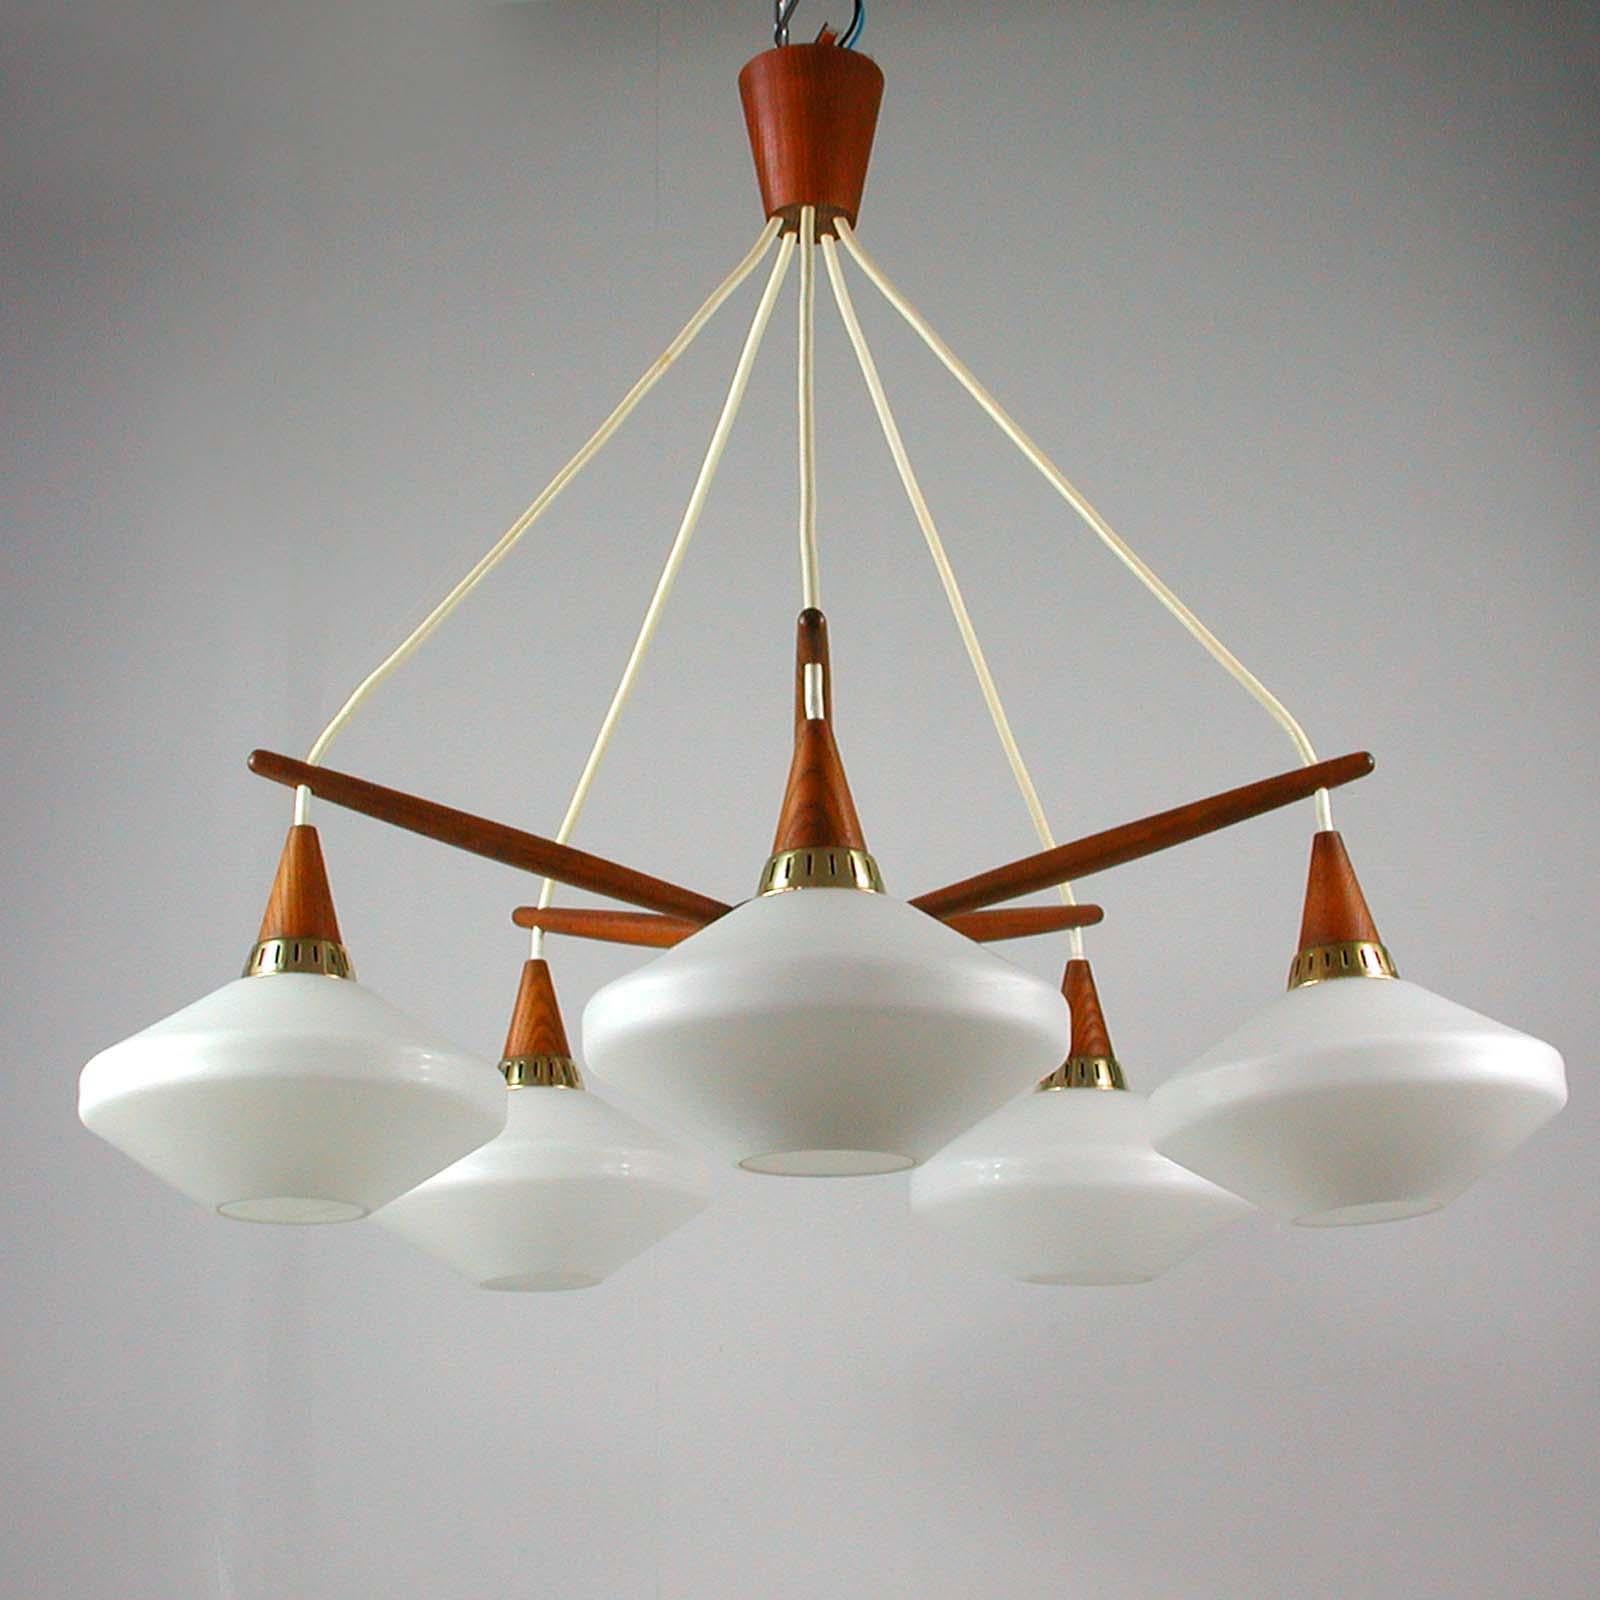 This elegant five-light chandelier was manufactured in Sweden by ASEA in the late 1950s-early 1960s and attributed to Hans Bergström. It is made of teak and has got five satin opal glass lampshades with brass details.

Condition is very good and